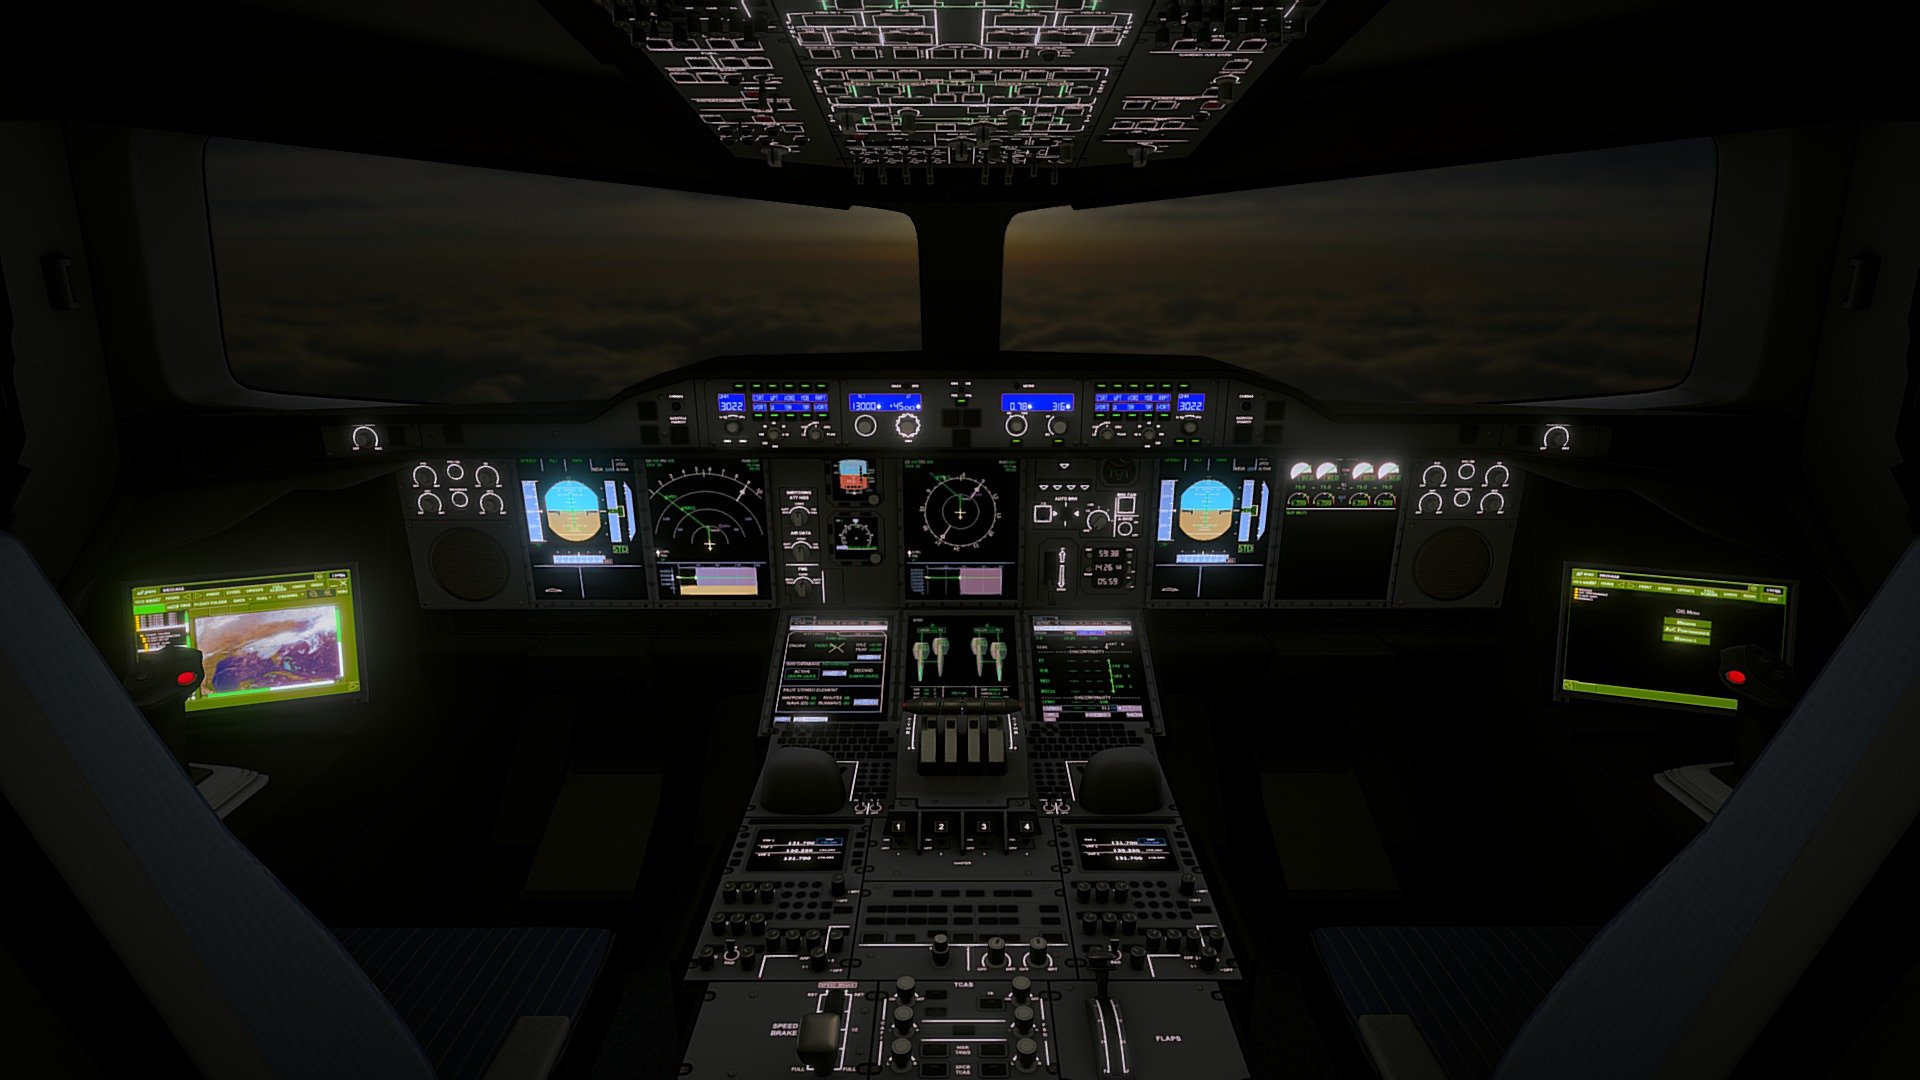 just for demo purposes to show the emission maps included within the asset

this night flight scenario uses almost the same shaders setup as the day flight scenario

the game ready asset is available for purchase here: https://skfb.ly/oDXpK
 - Airbus A380 Cockpit Flight Deck - Night Flight - 3D model by CGAmp 3d model